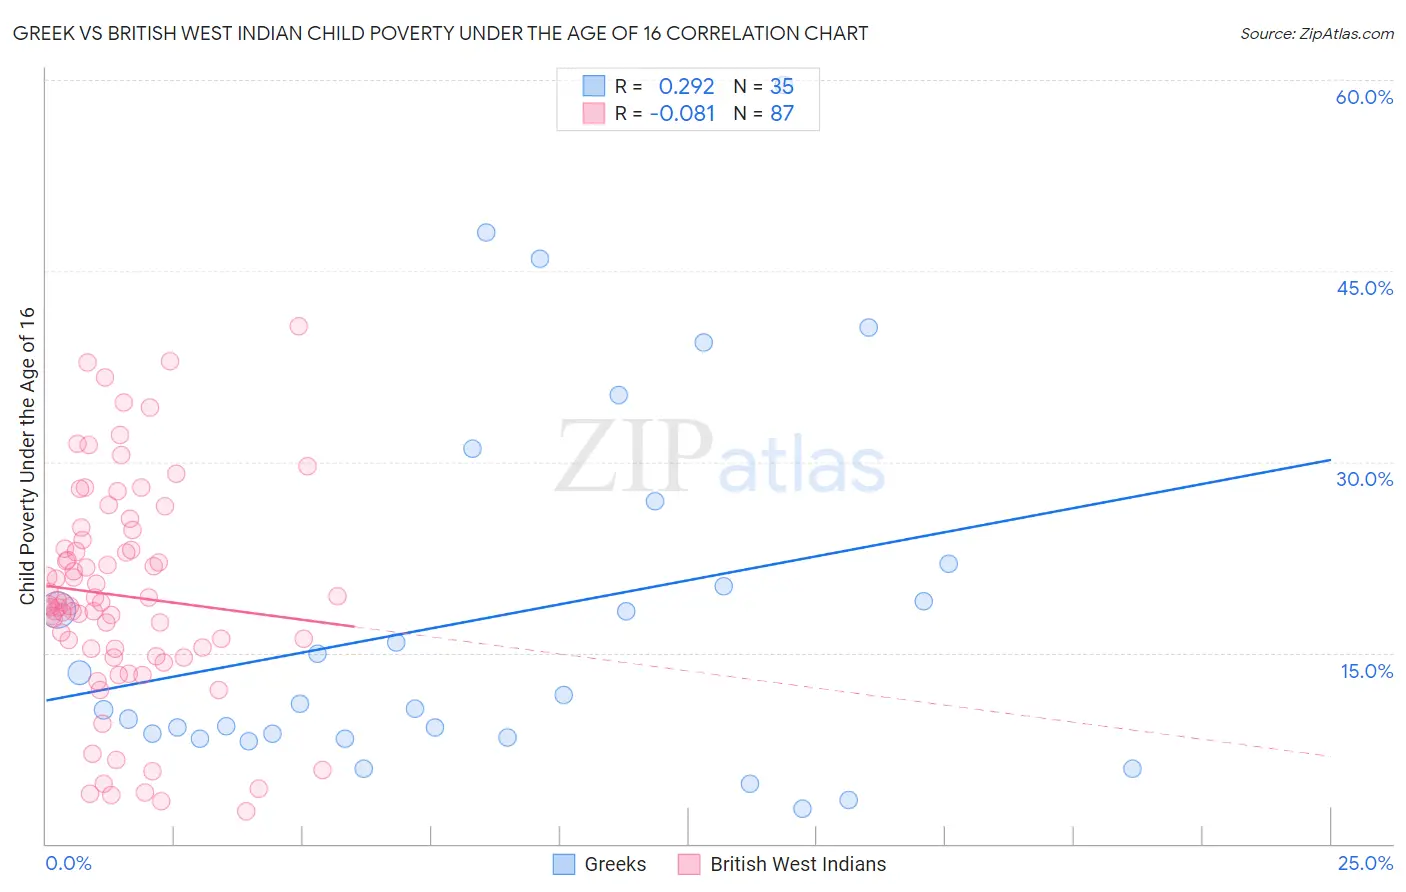 Greek vs British West Indian Child Poverty Under the Age of 16